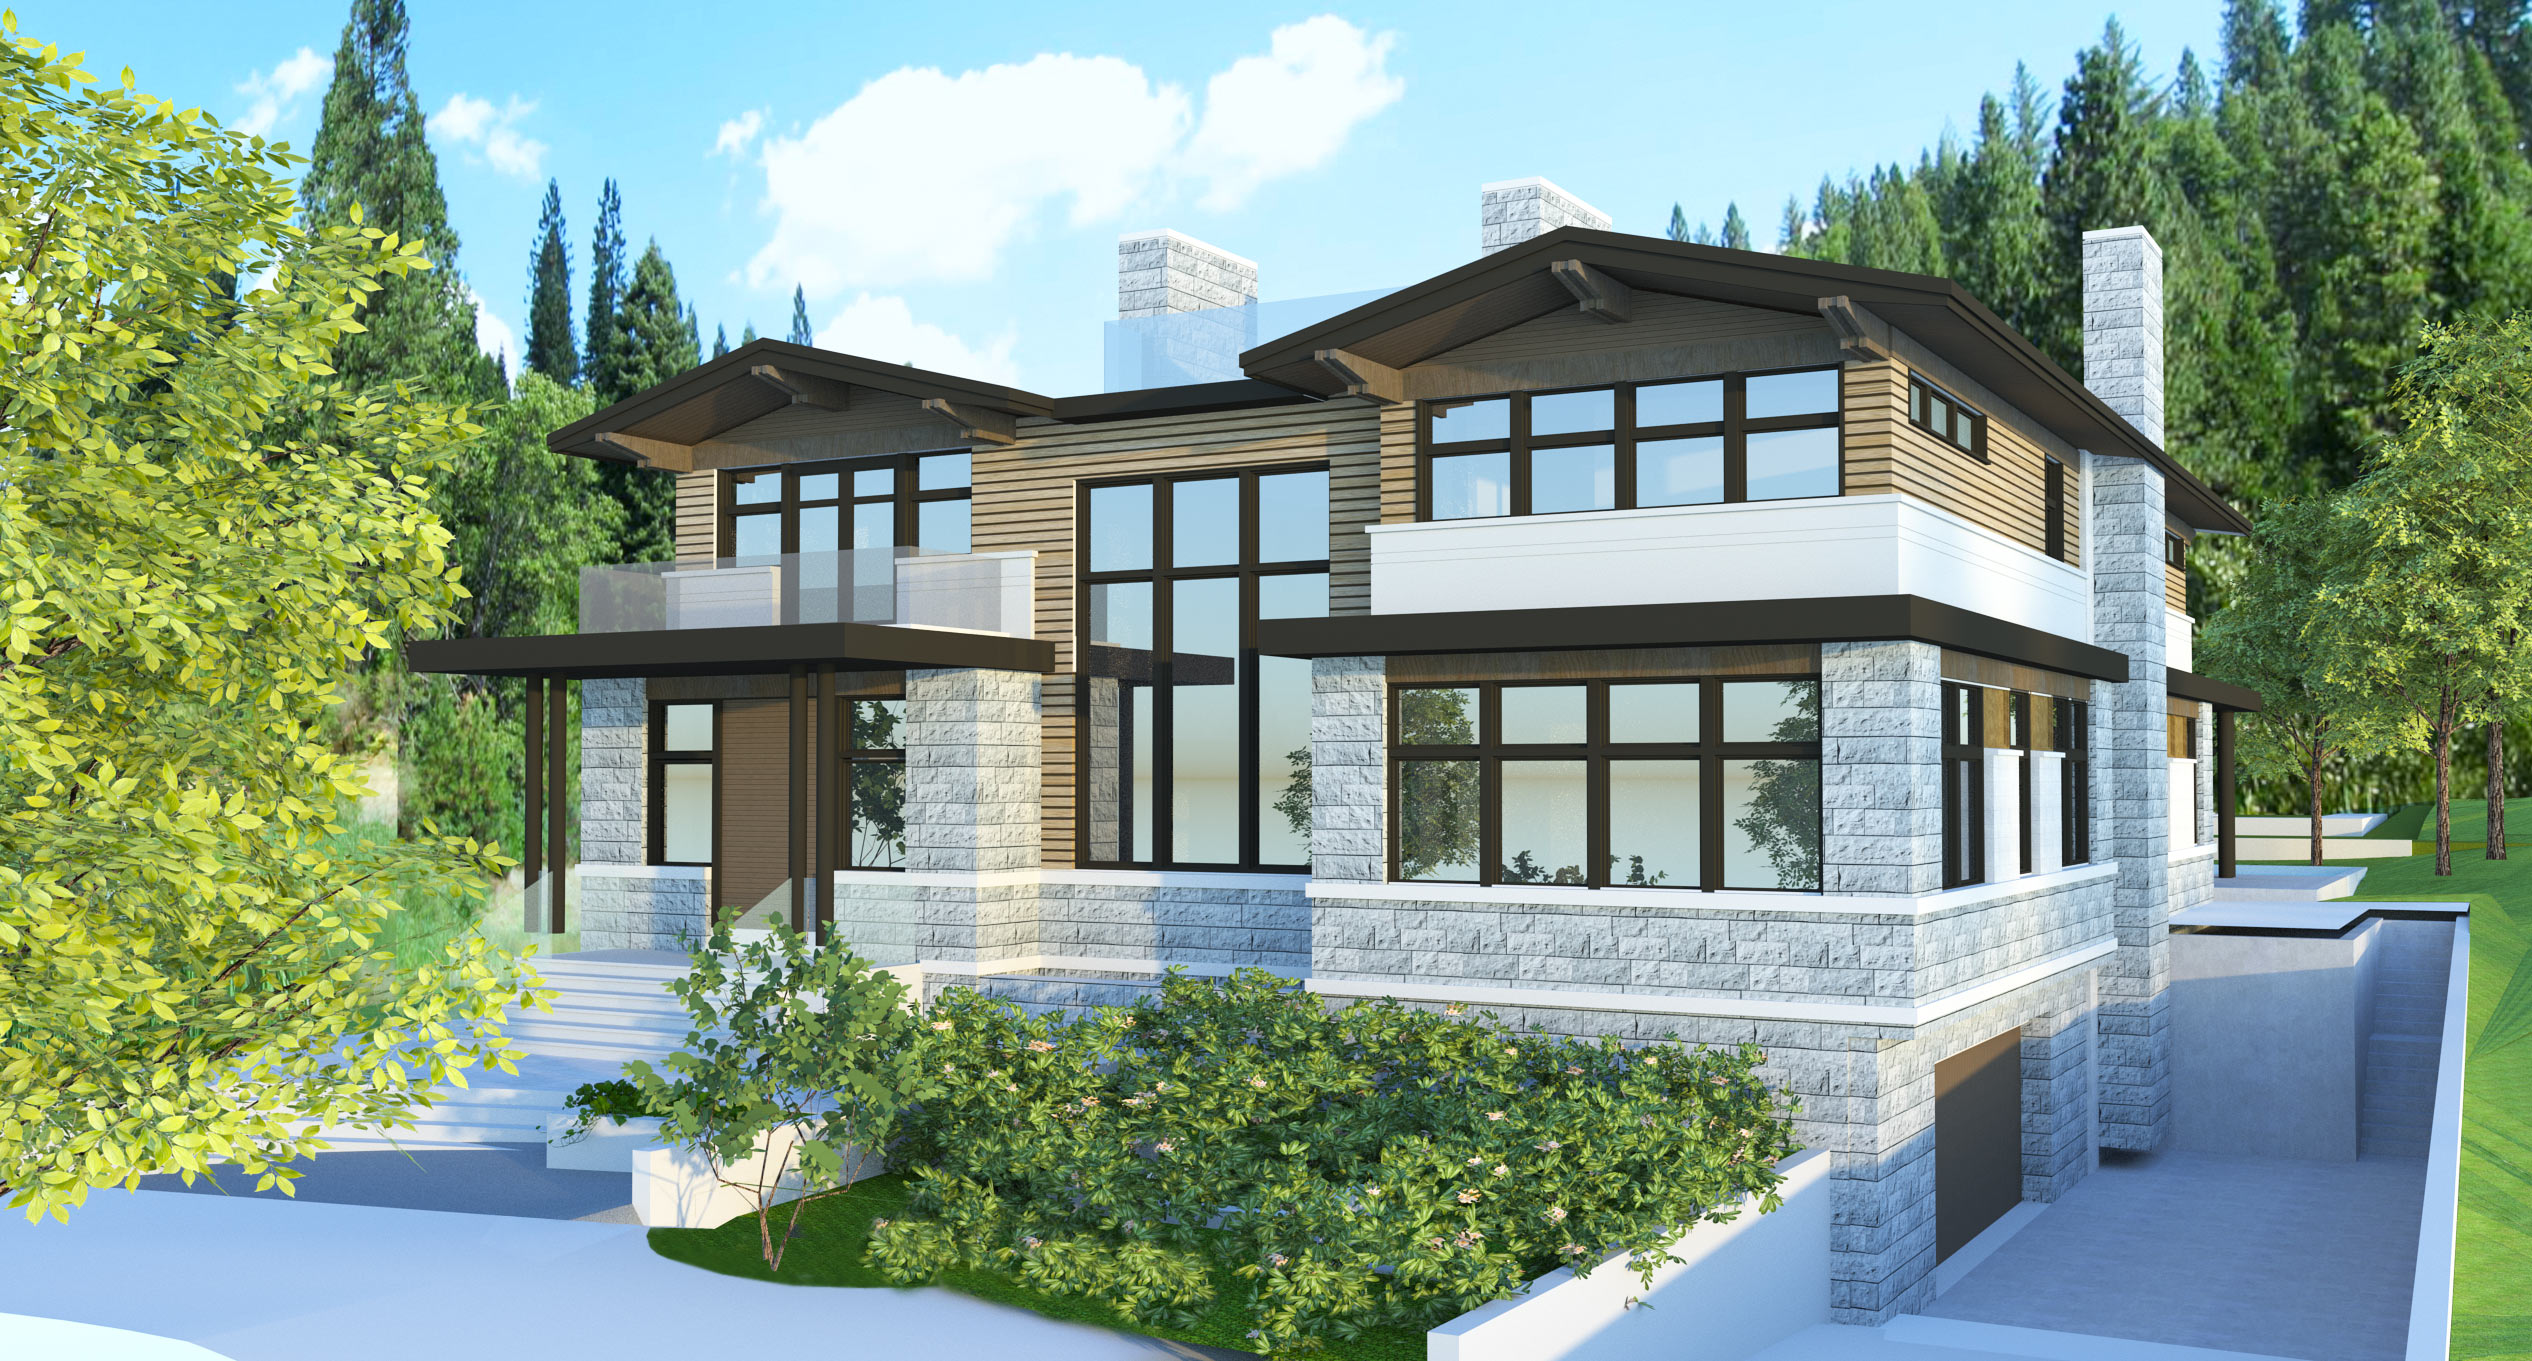 DRUMMOND RESIDENCE (In progress) - Peter Rose Architecture + Interiors Inc.